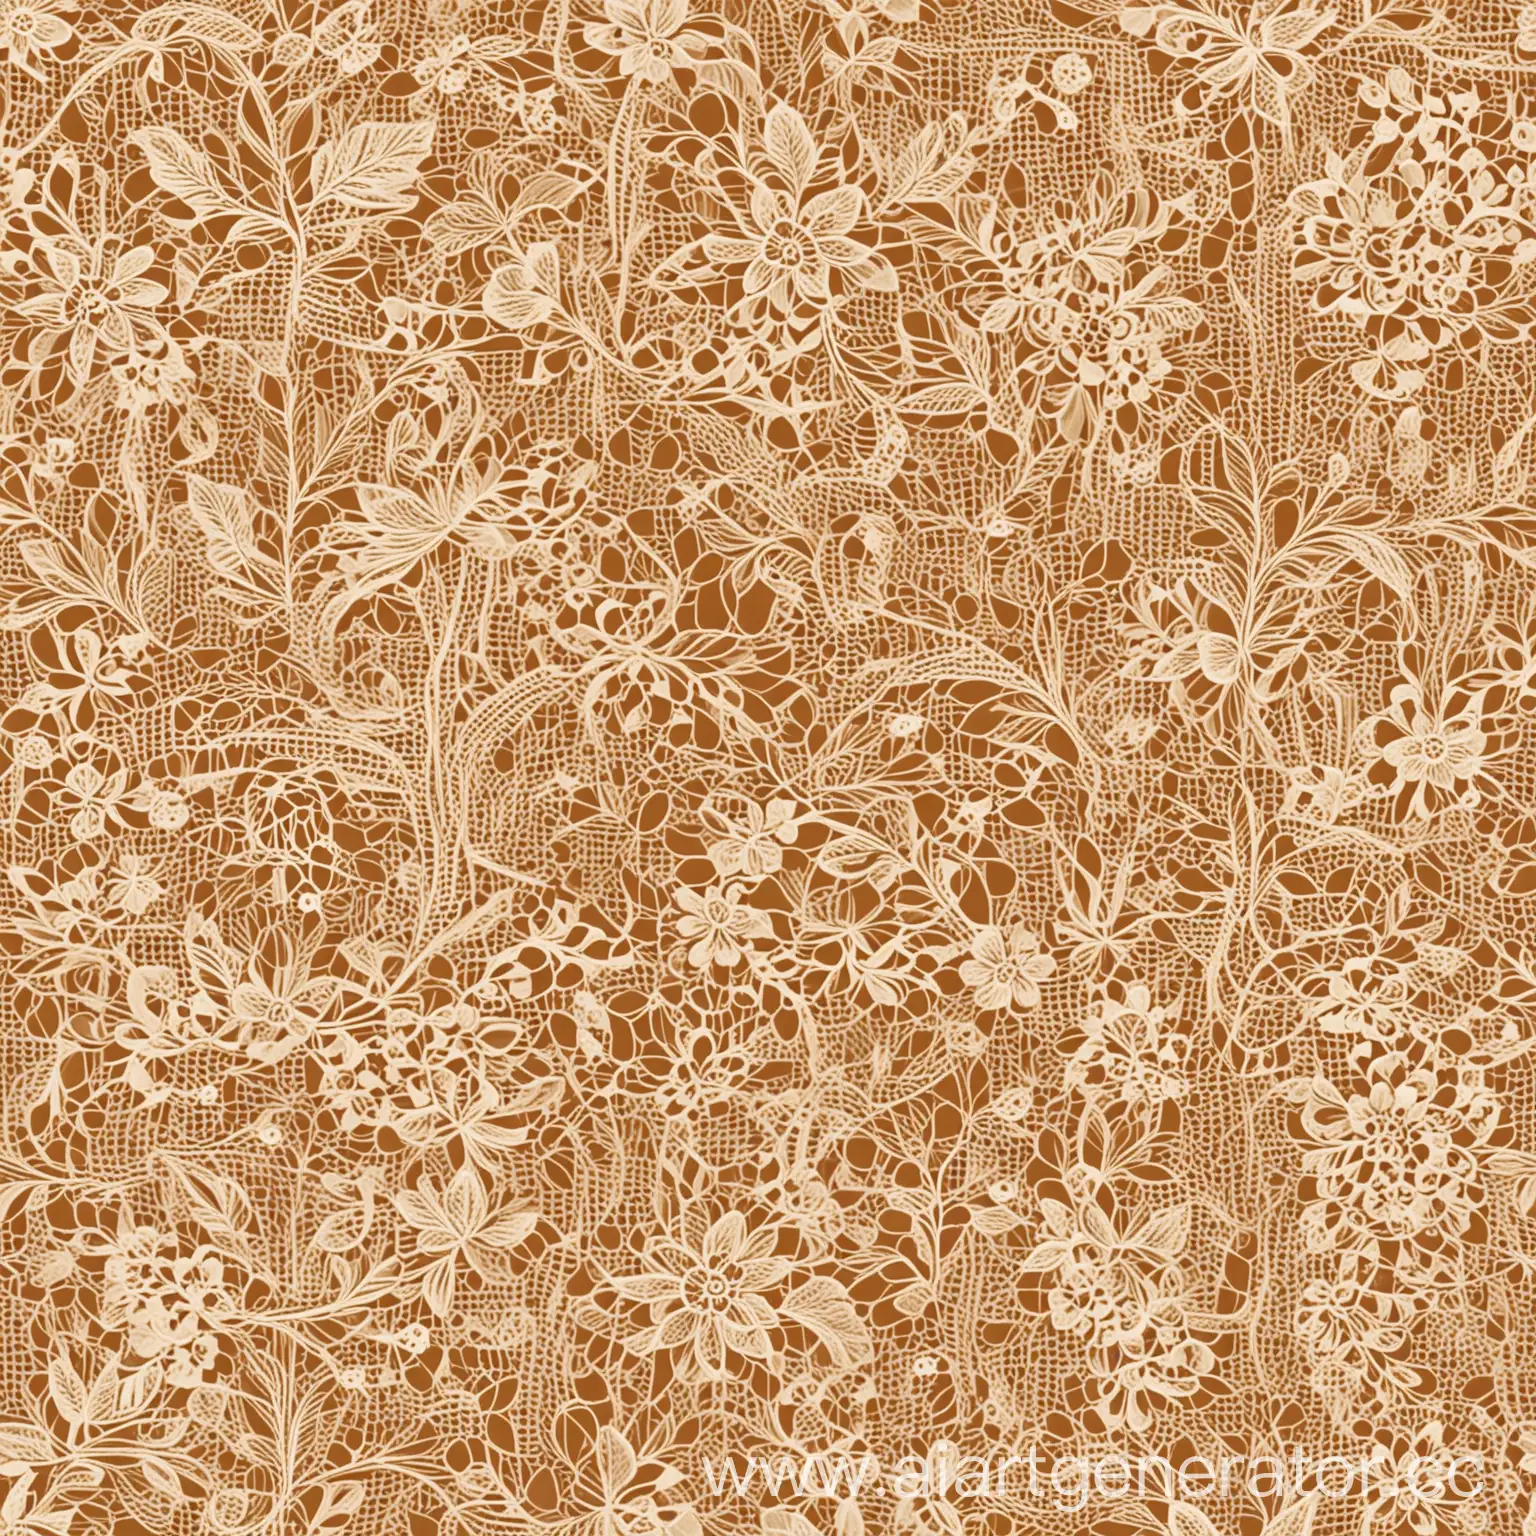 Seamless lace pattern, stylized flowers, lace mesh, leaves, on a beige background